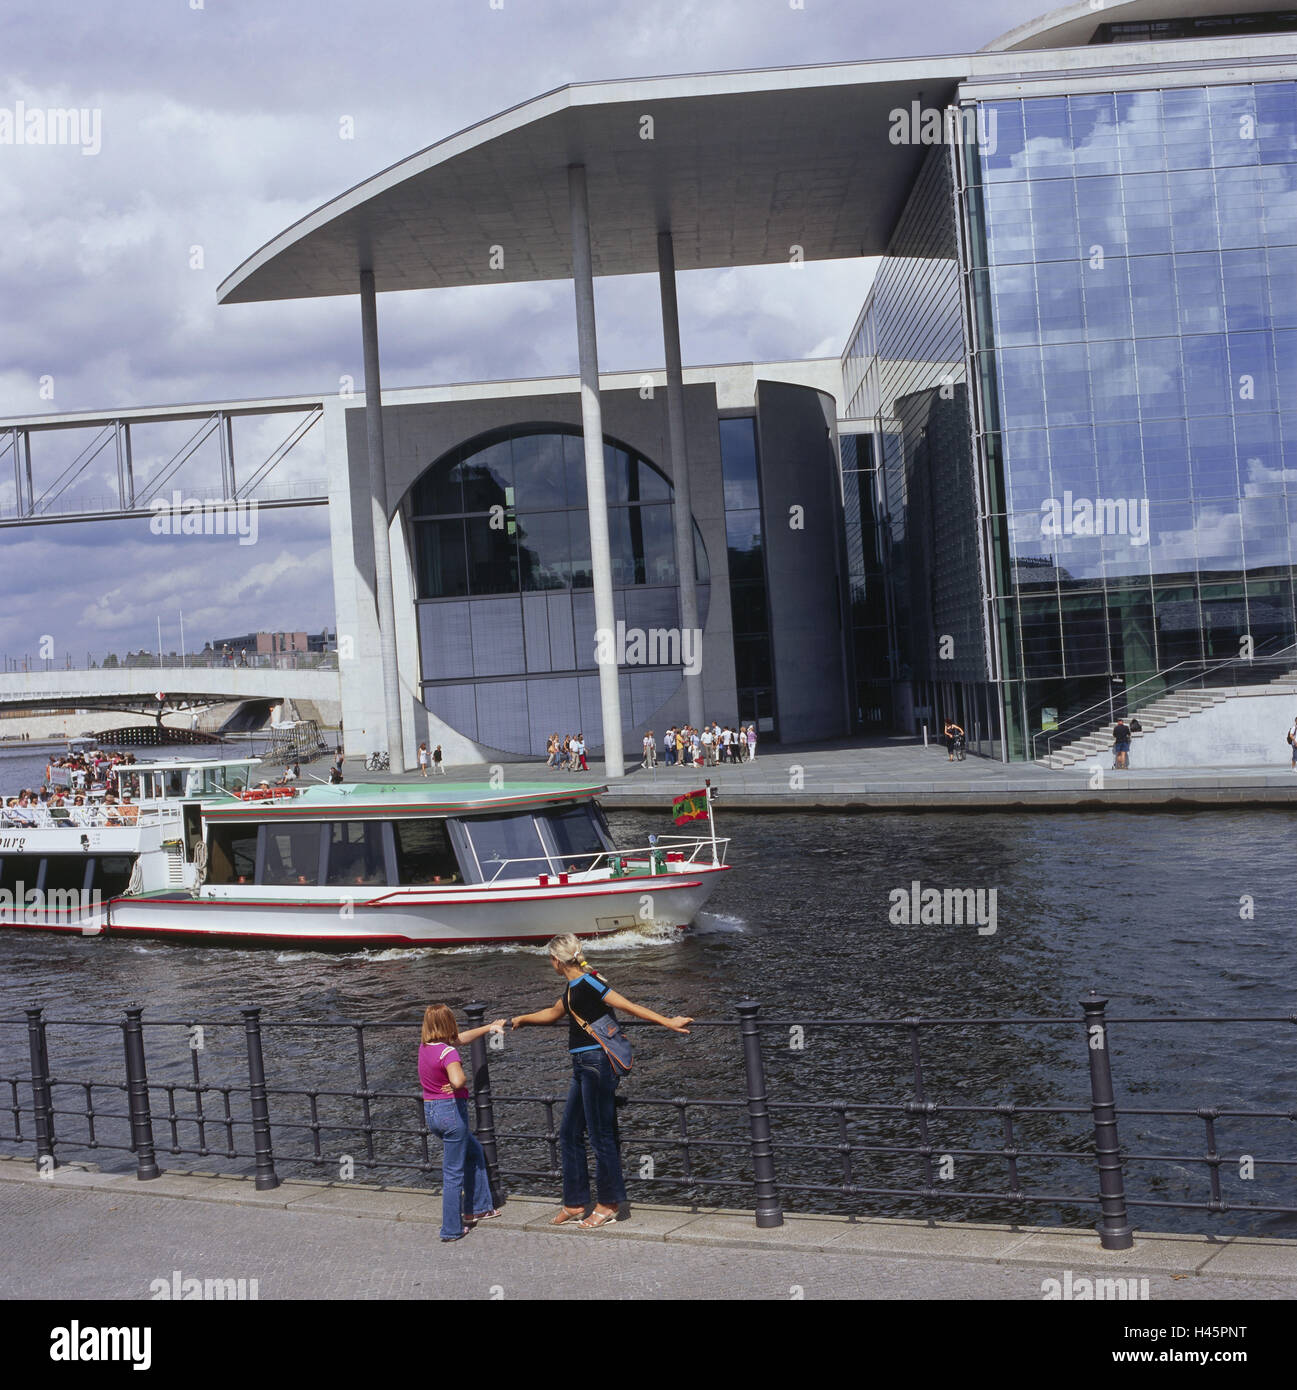 Germany, Berlin, the Bundestag, Marie-Elisabeth-Lüders-Haus, detail, tourist, river Spree, holiday ship, Europe, town, capital, place of interest, Spree bow, government district, bridge, architecture, building, Lüdersblock, exposed concrete, rotunda, parliament library, library, person, outside, Spree shore, round window, pillars, ship, navigation, Stock Photo